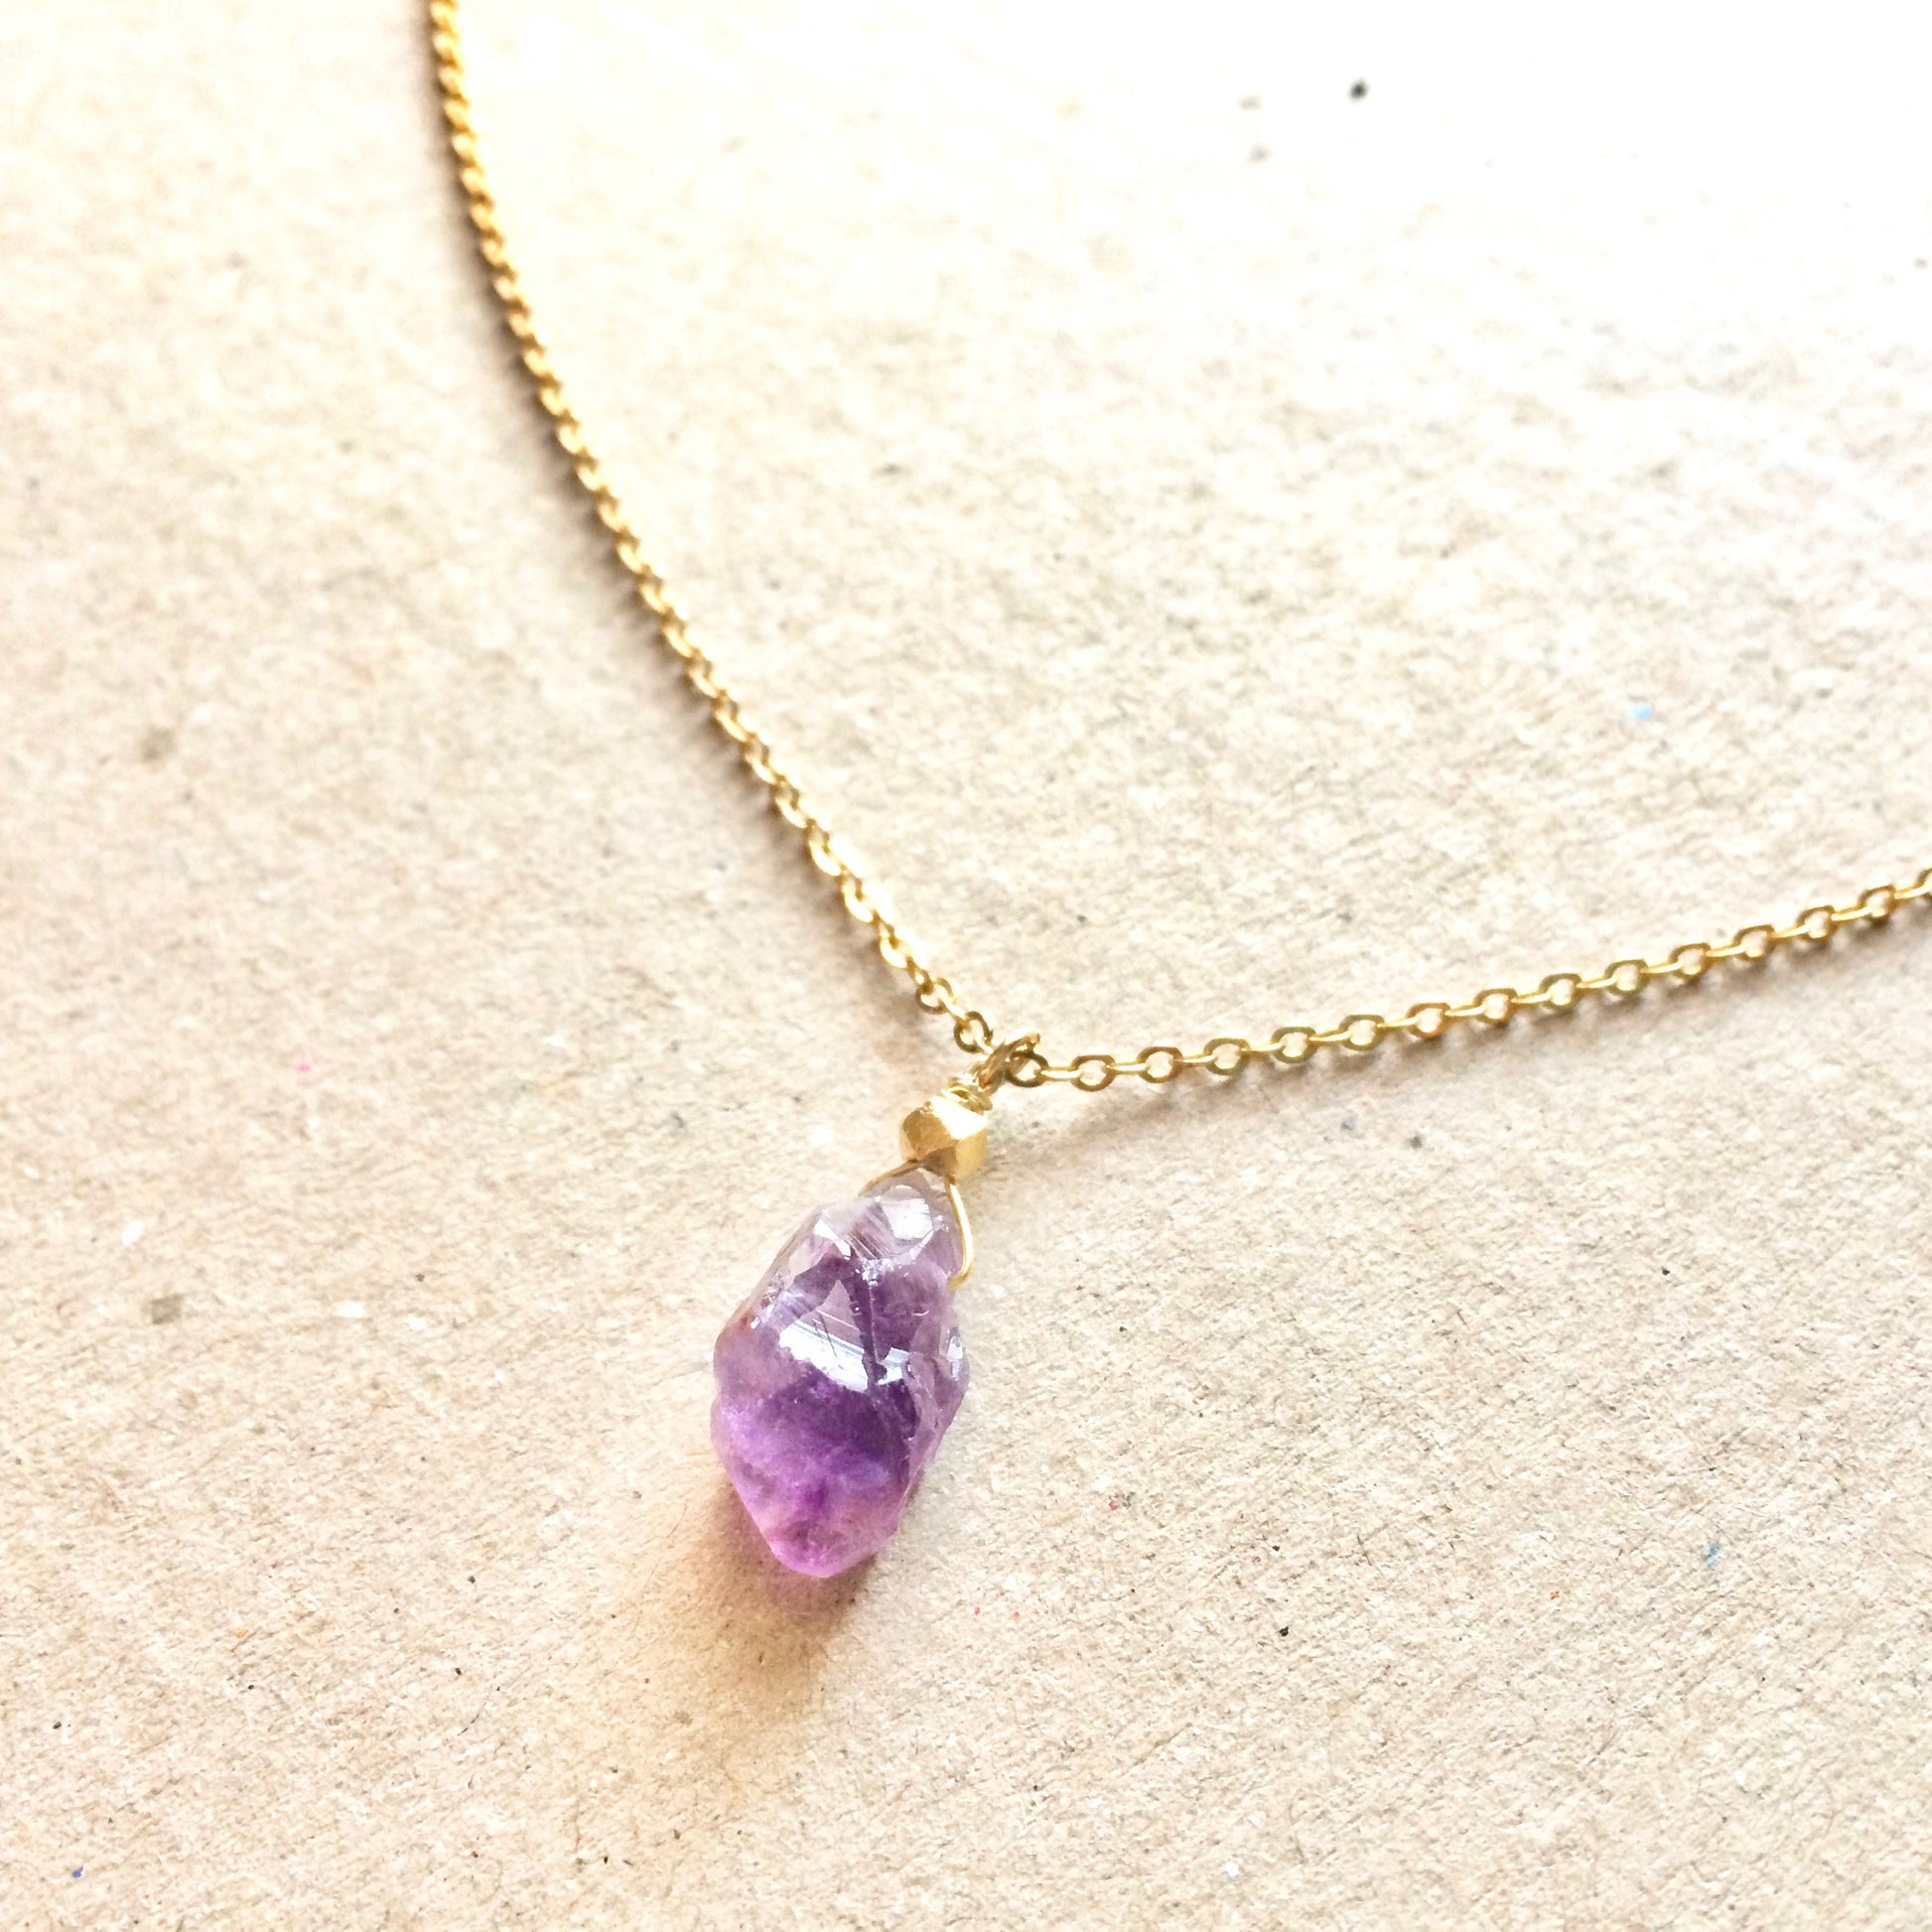 Real Raw Amethyst Crystal Necklace | Natural Amethyst Jewelry | IB Jewelry | IB Jewelry